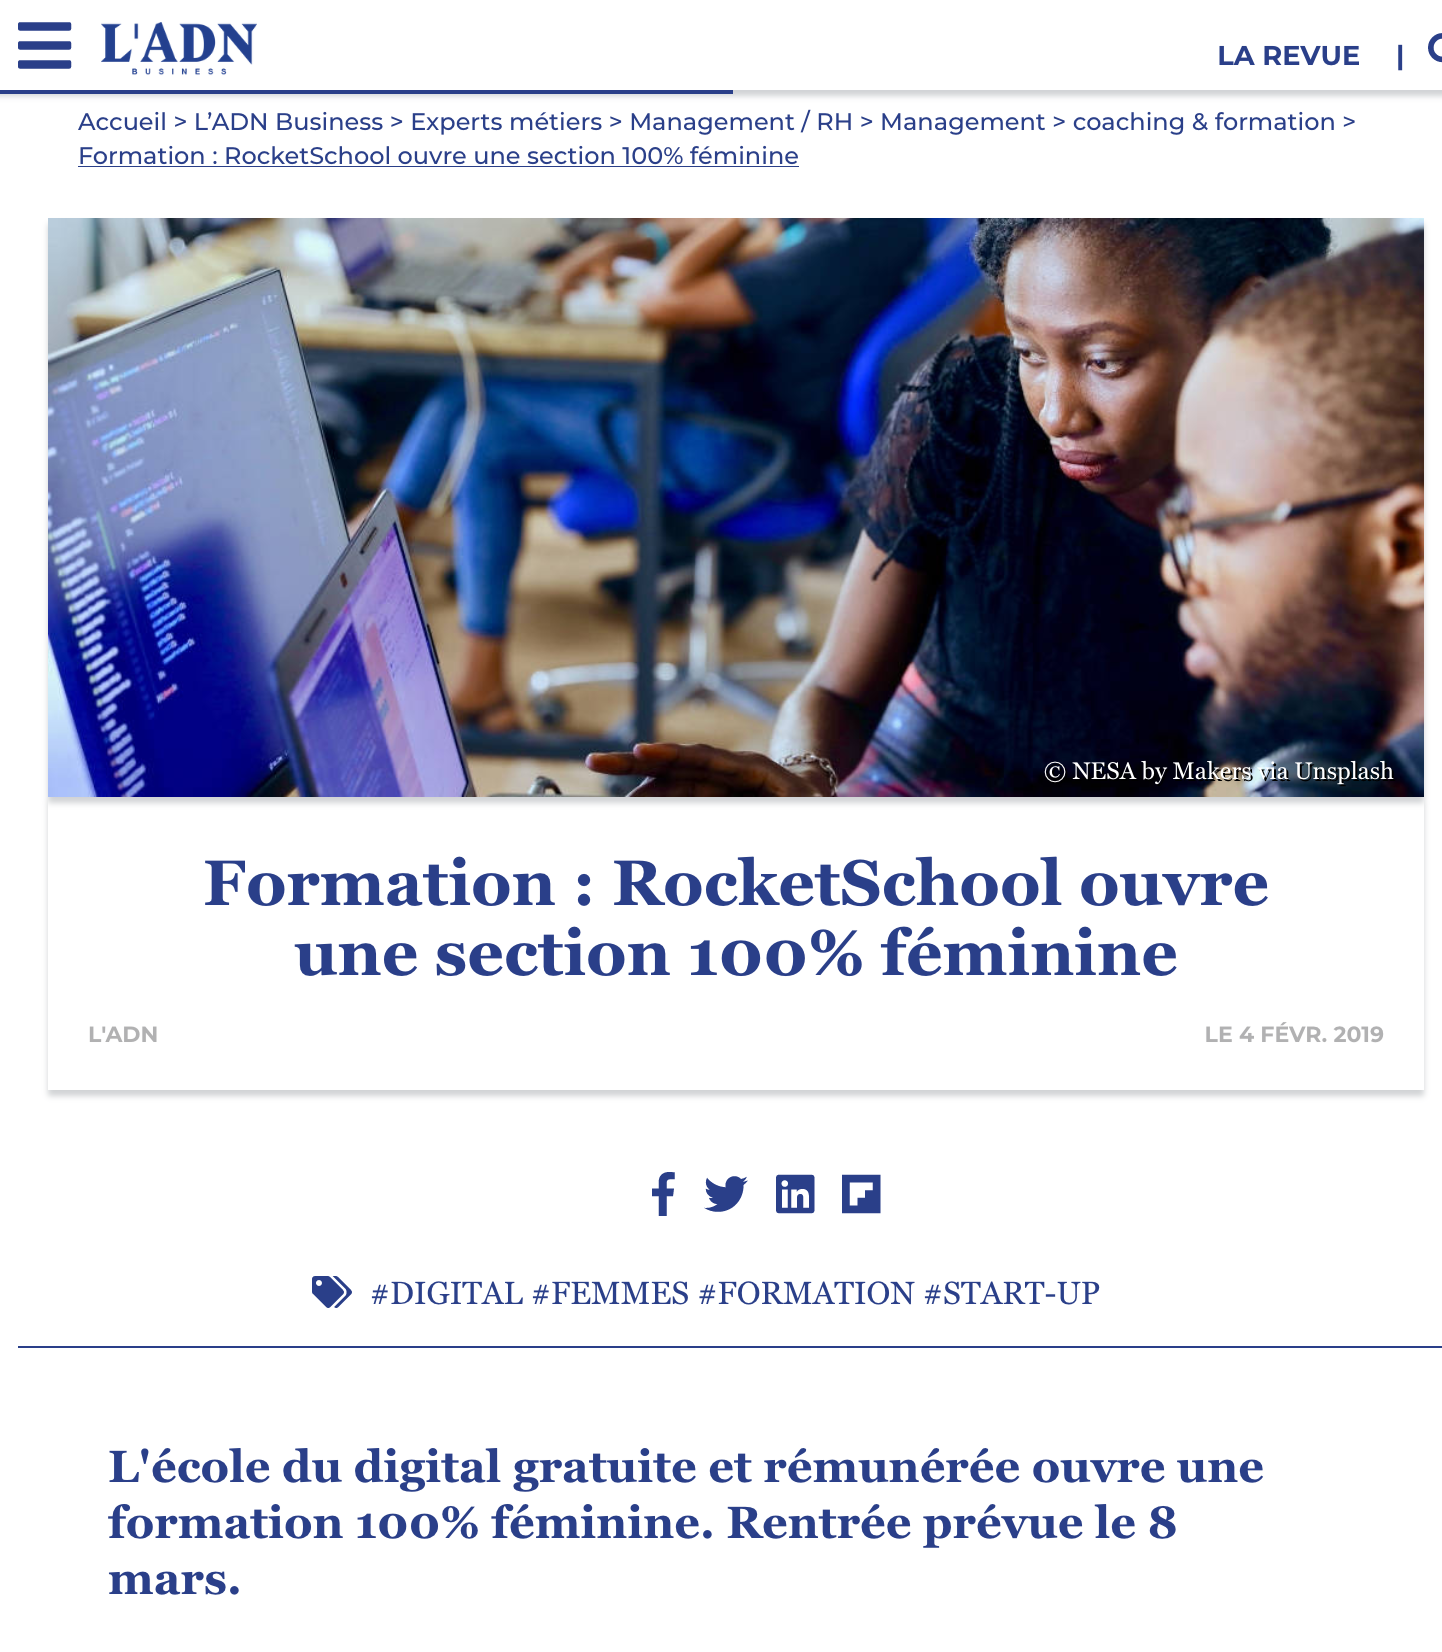  Formation : RocketSchool ouvre une section 100% féminine